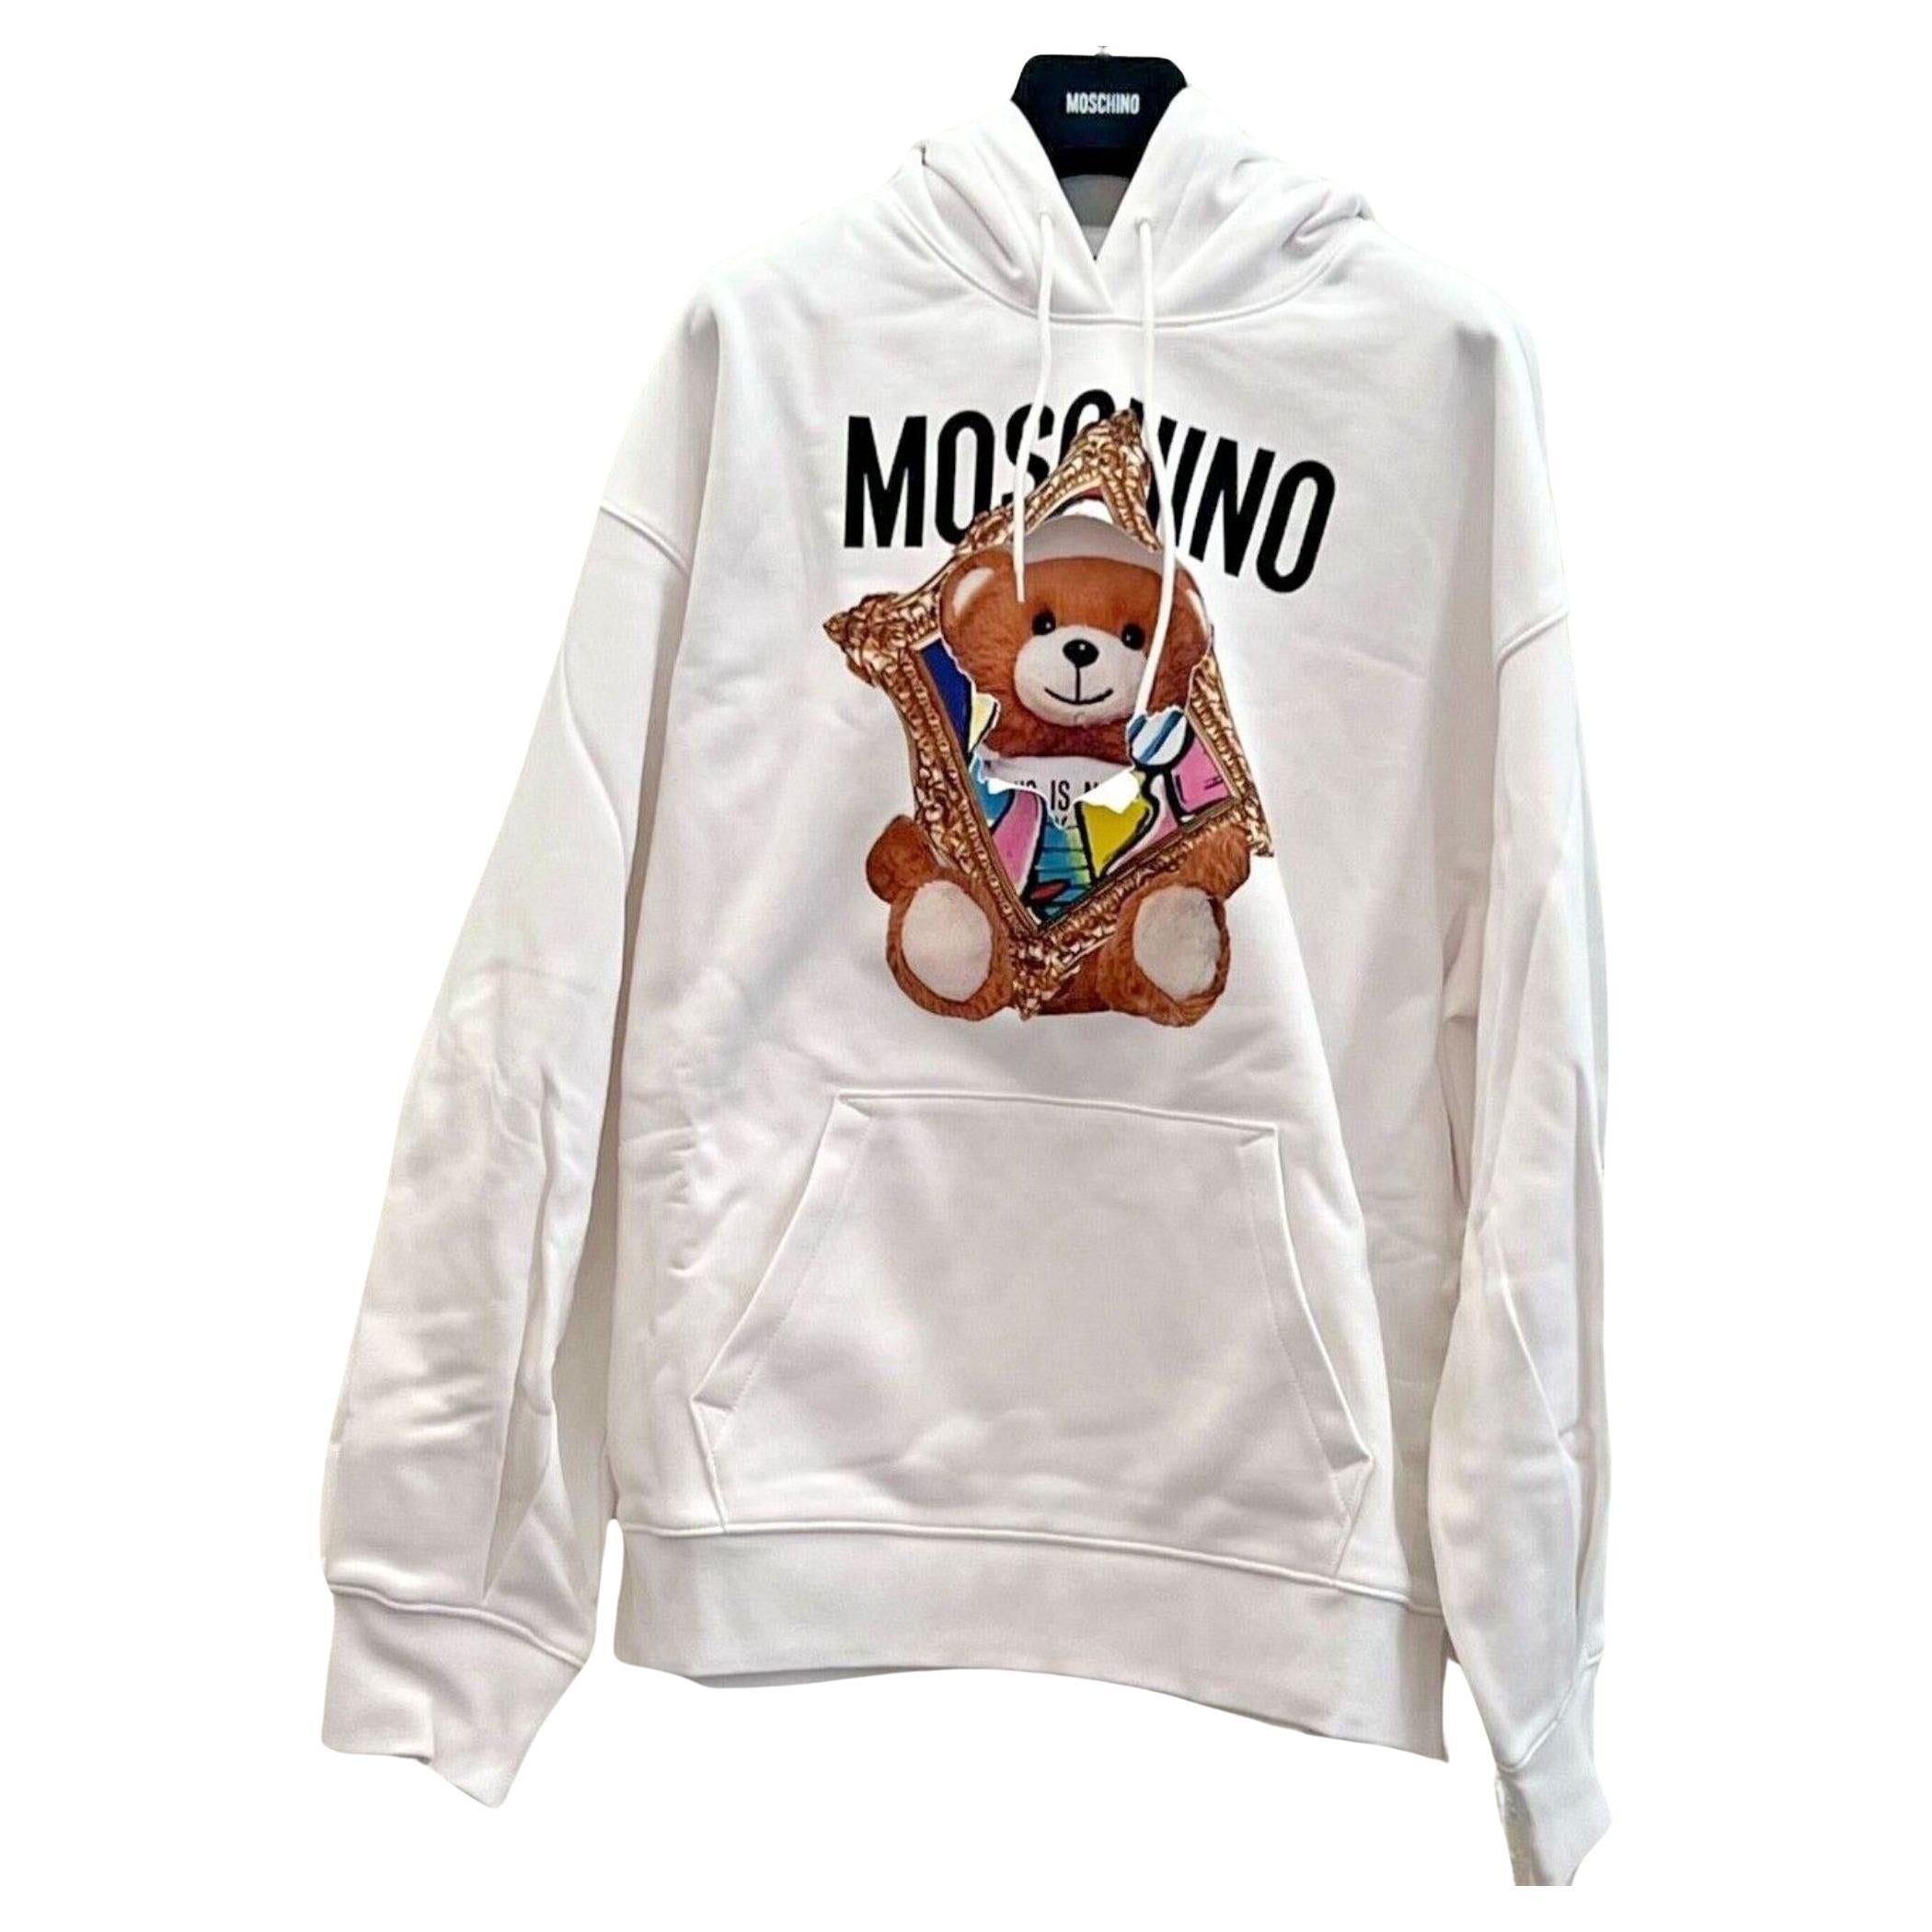 SS20 Moschino Couture Teddybear Bursting Thru Painting Hoodie by Jeremy Scott For Sale